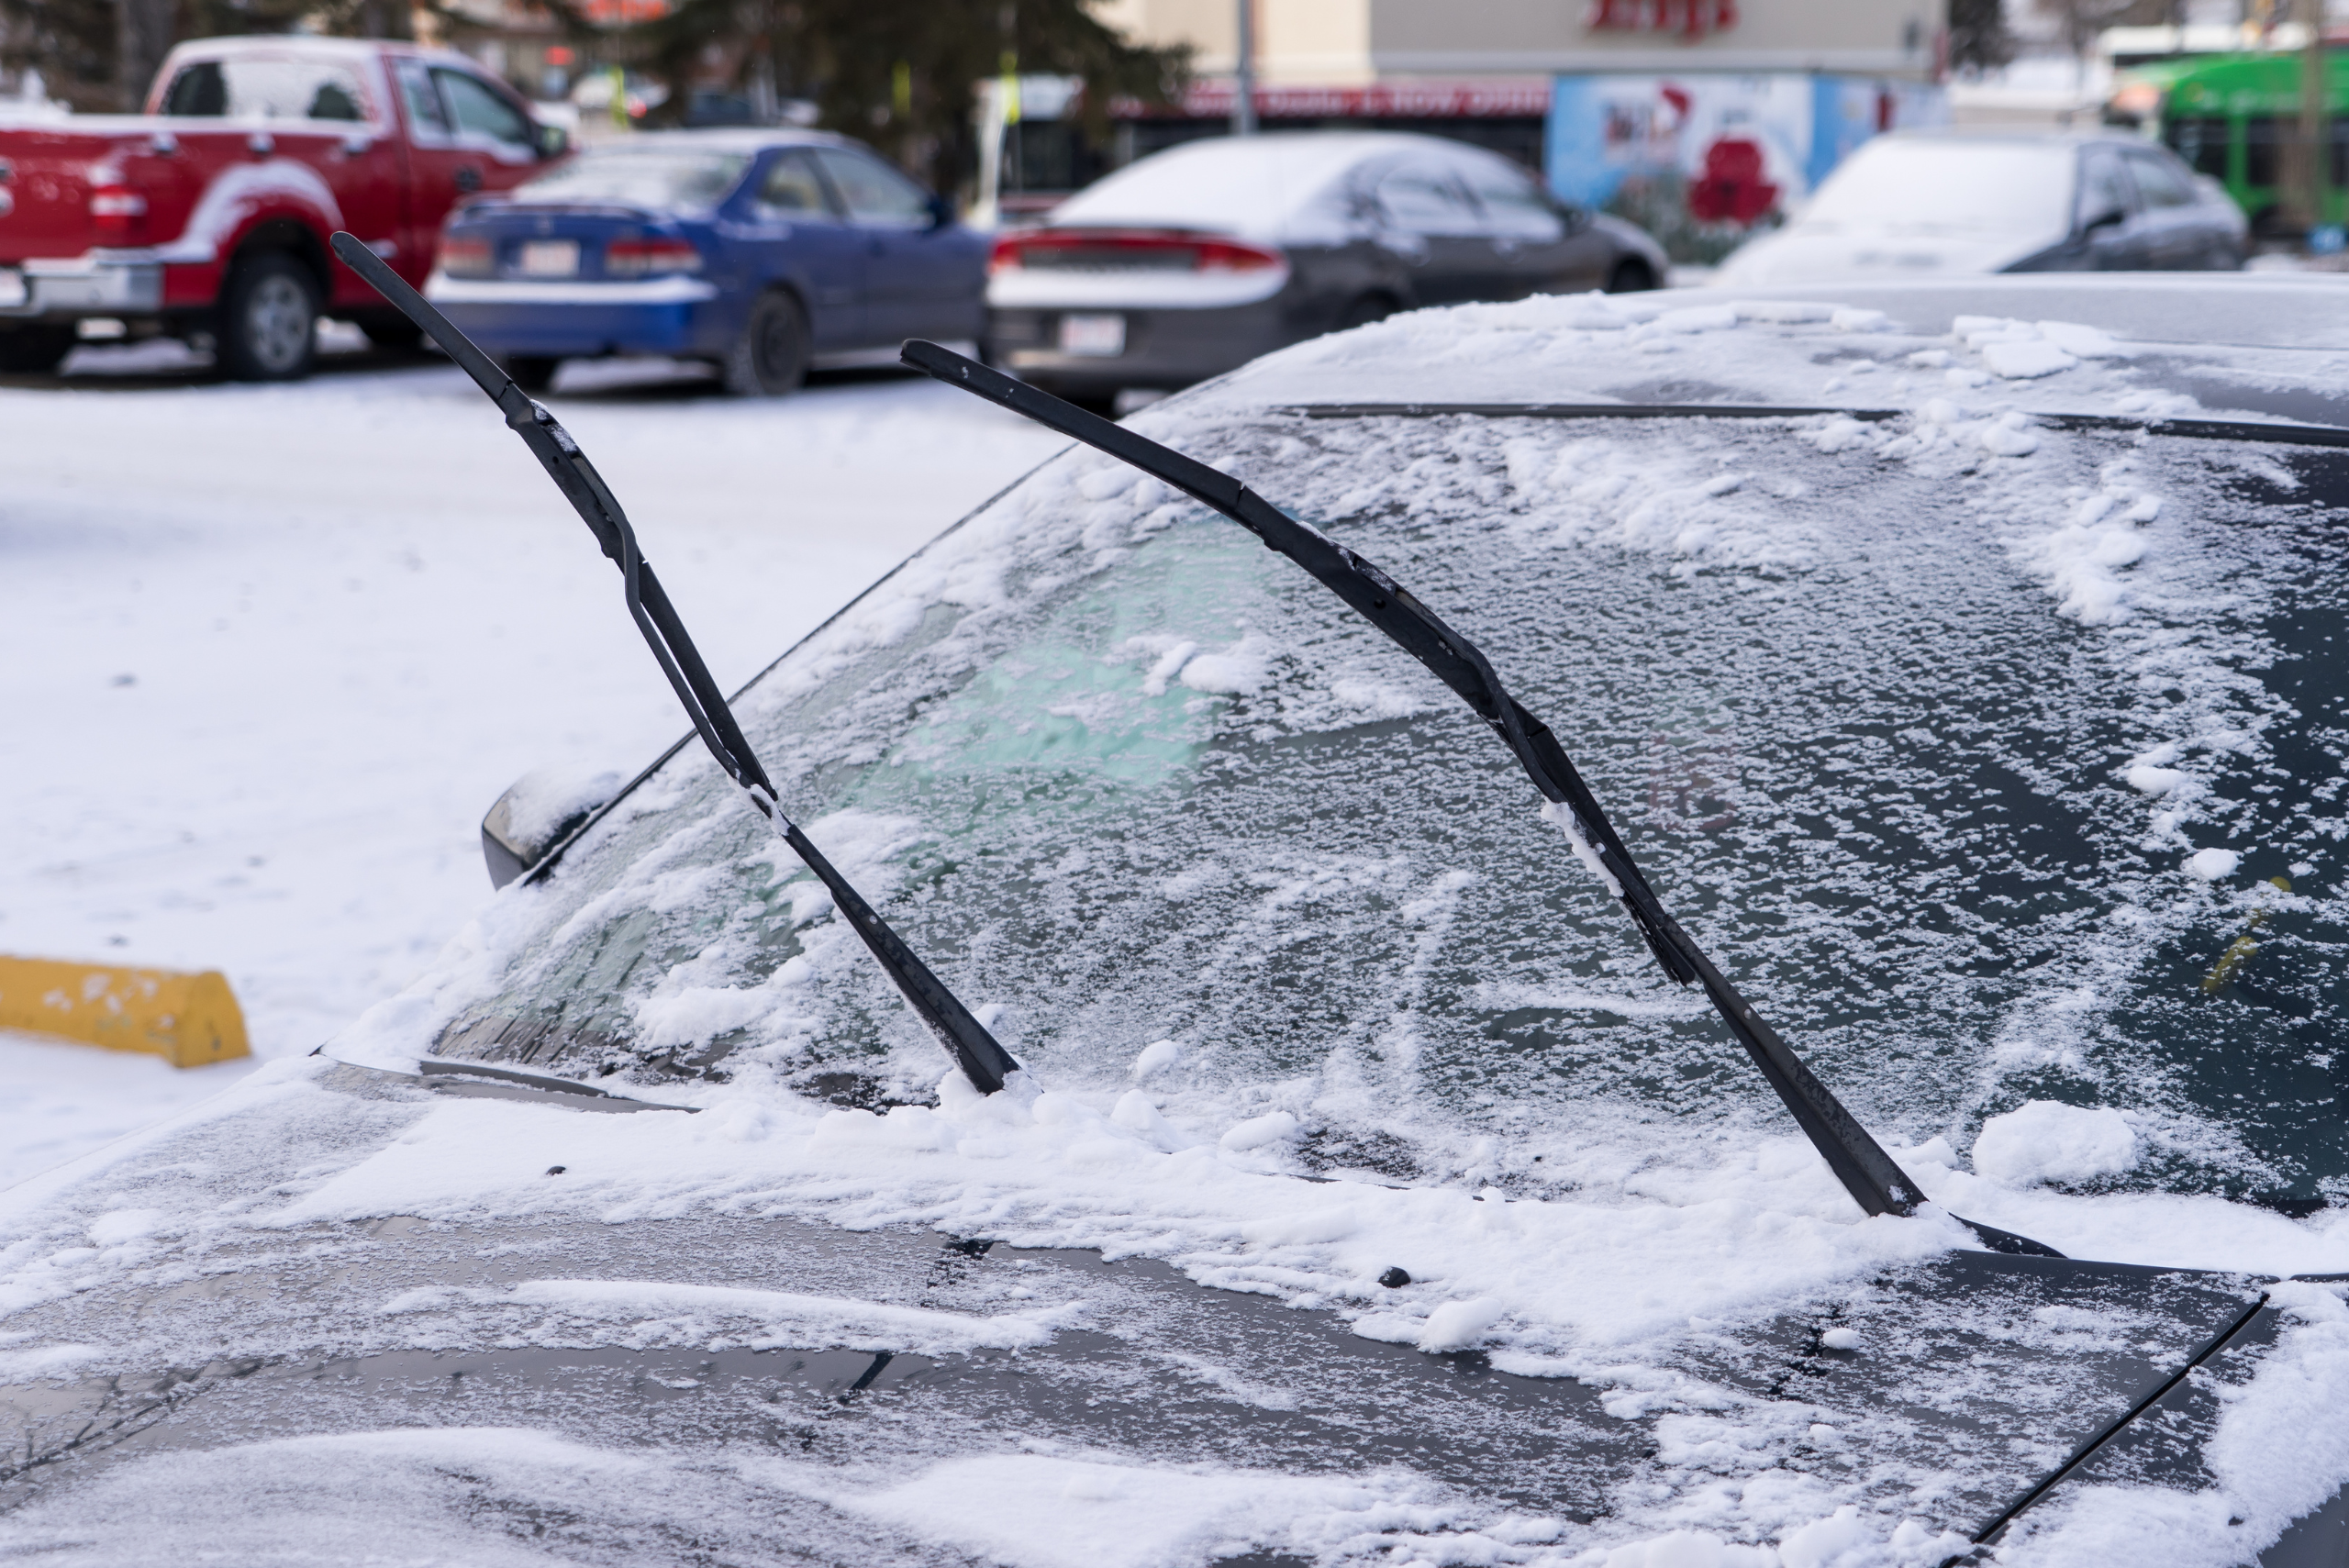 Car covered in snow and ice with its wiper blades lifted up while parked.